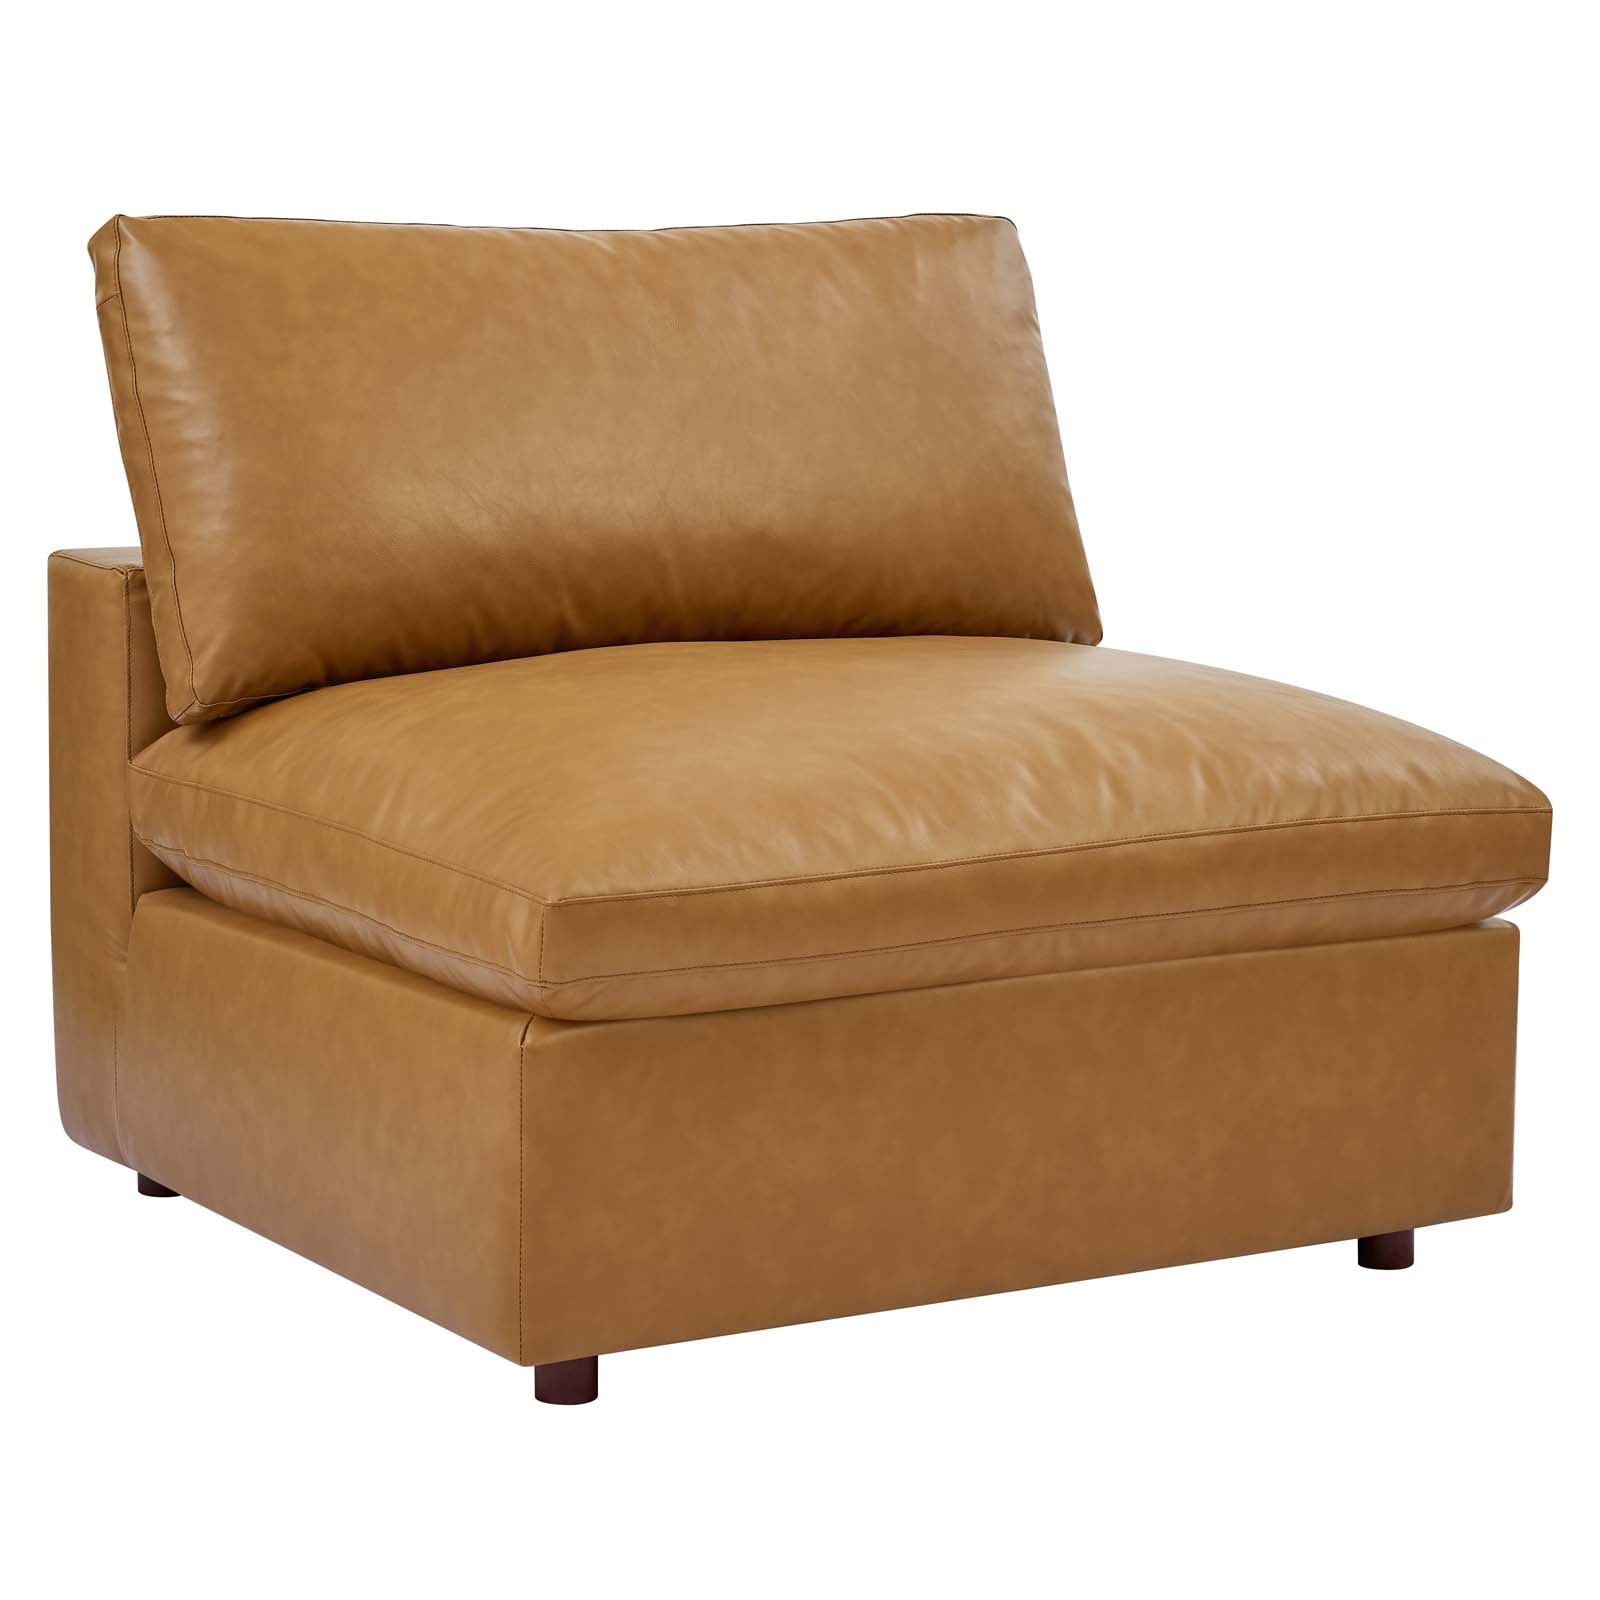 Modway Sofas & Couches - Commix Down Filled Overstuffed Vegan Leather 3 Seater Sofa Tan